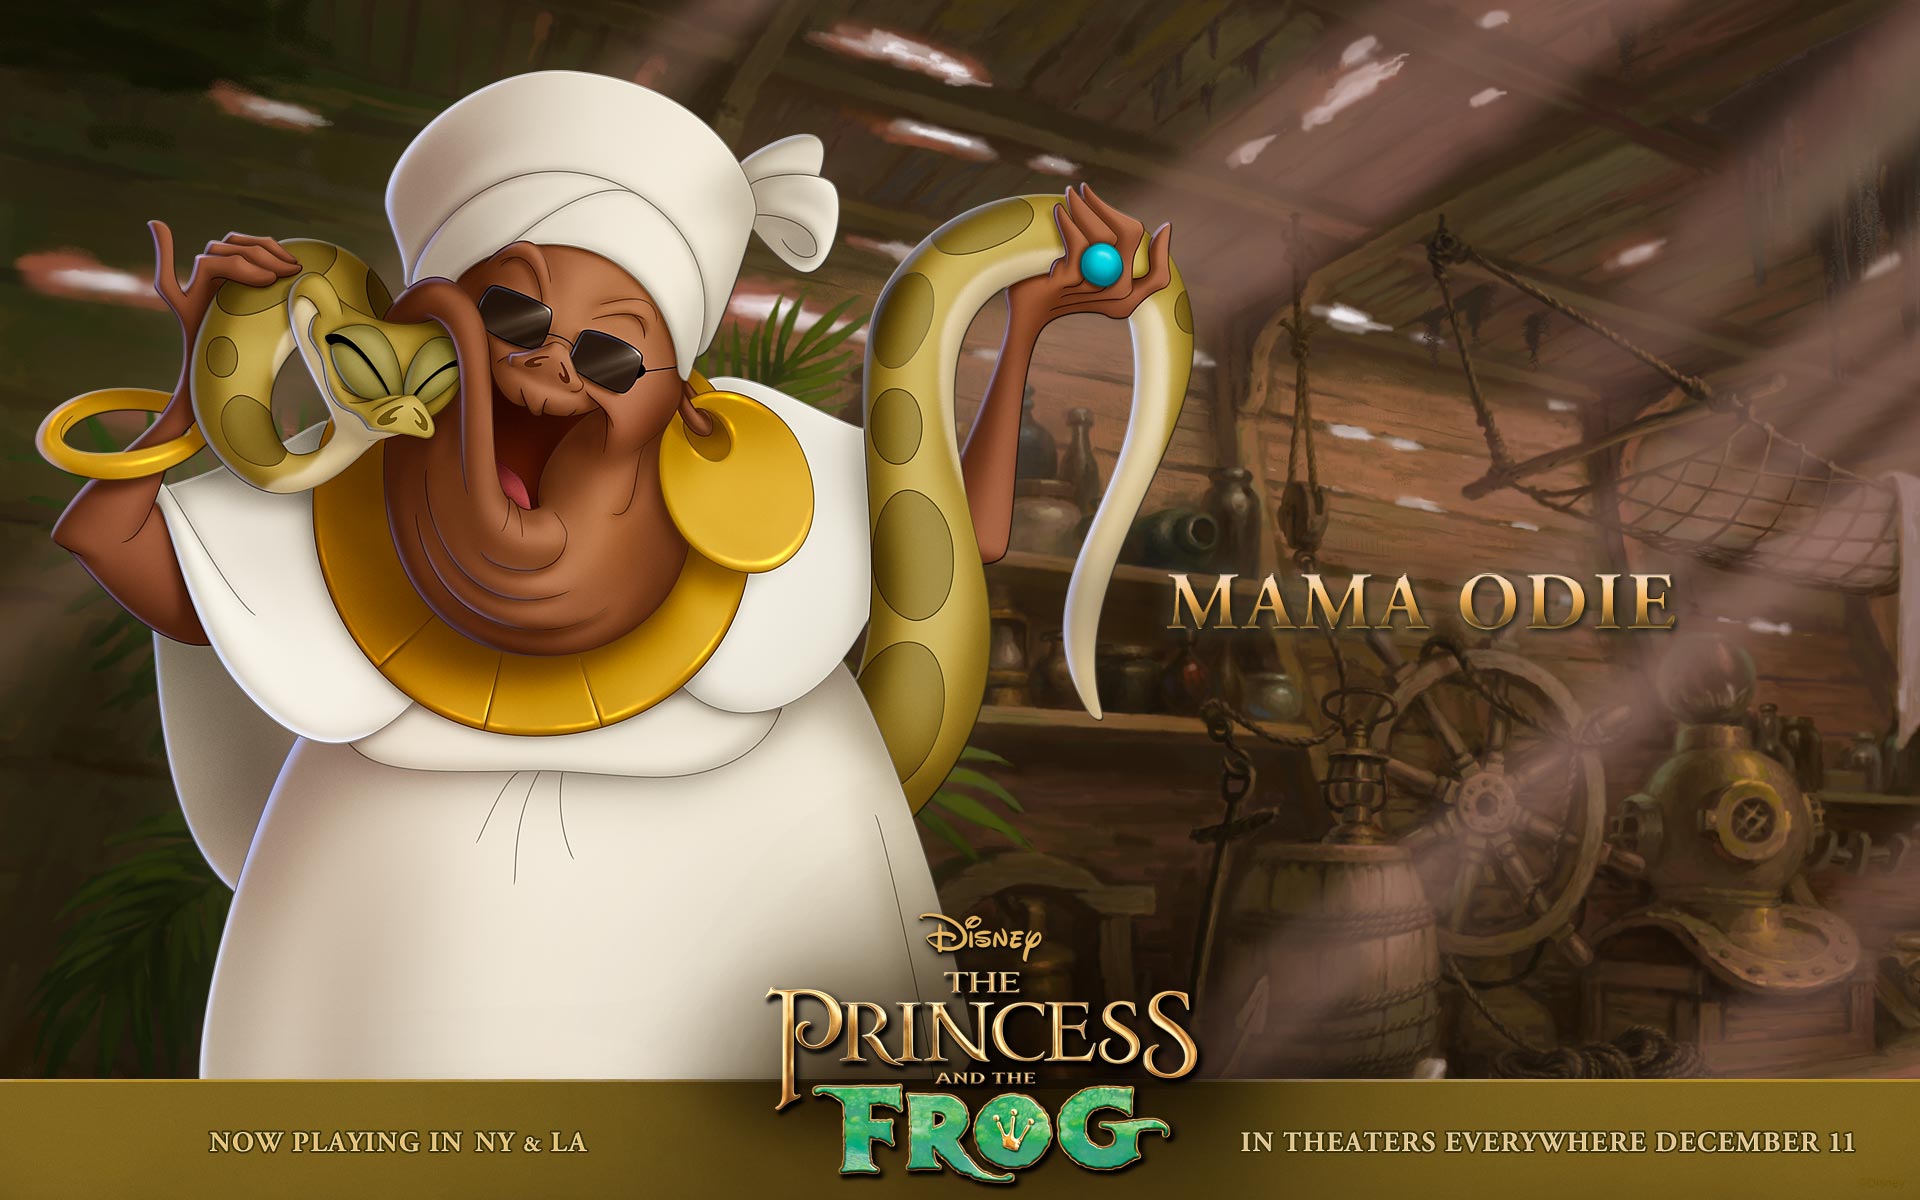 Mama Odie and Juju from Princess and the Frog Wallpaper.